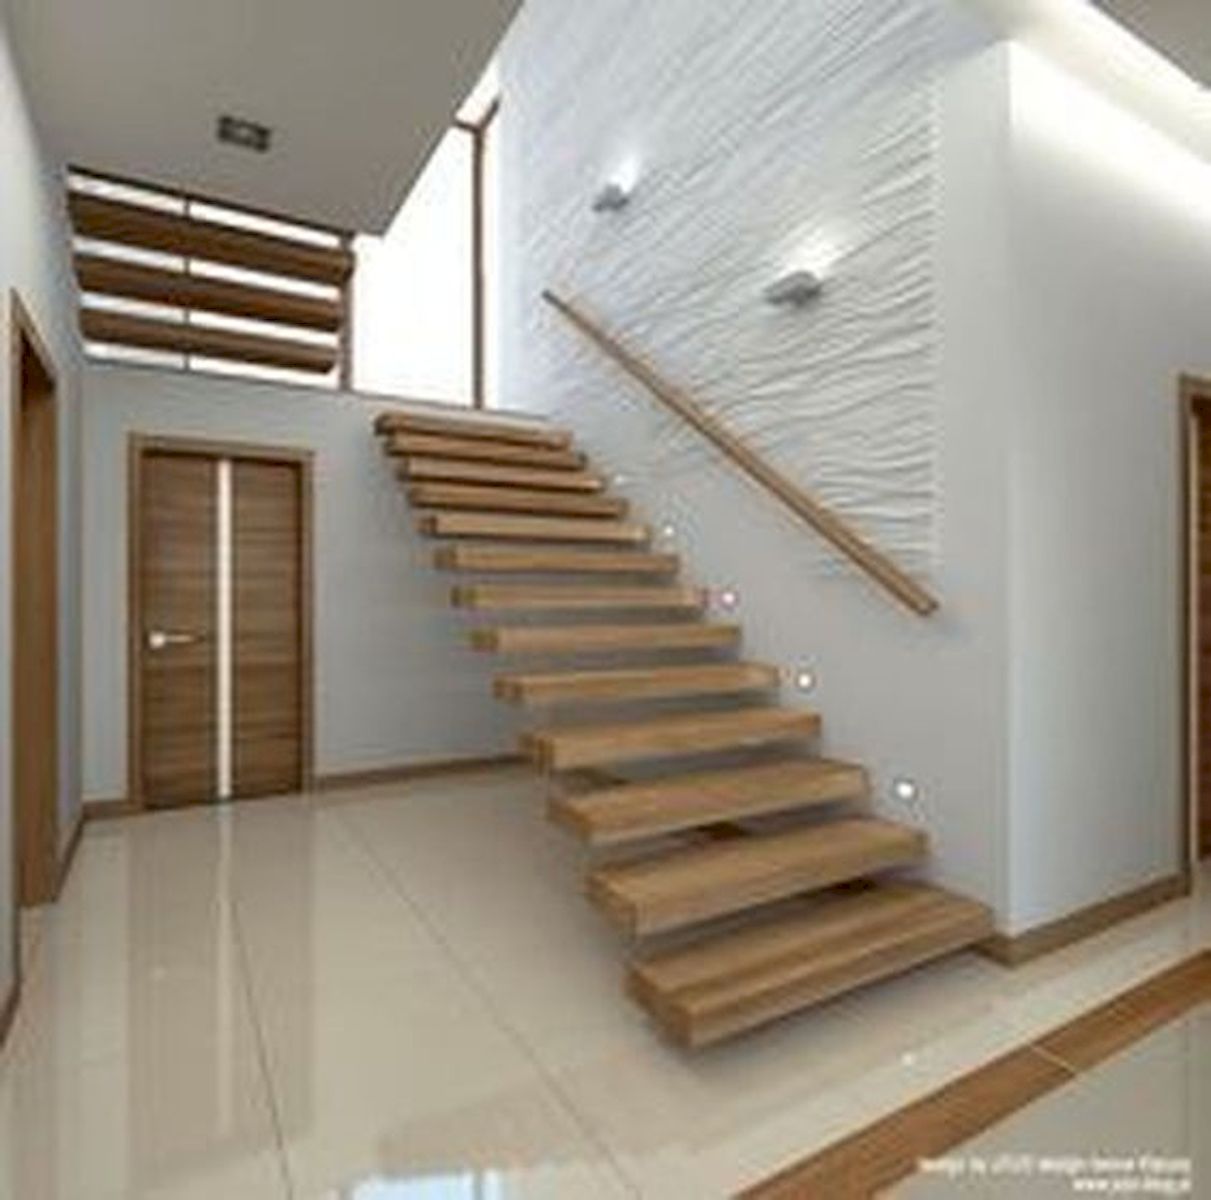 30 Awesome Wooden Stairs Design Ideas For Your Home (1)